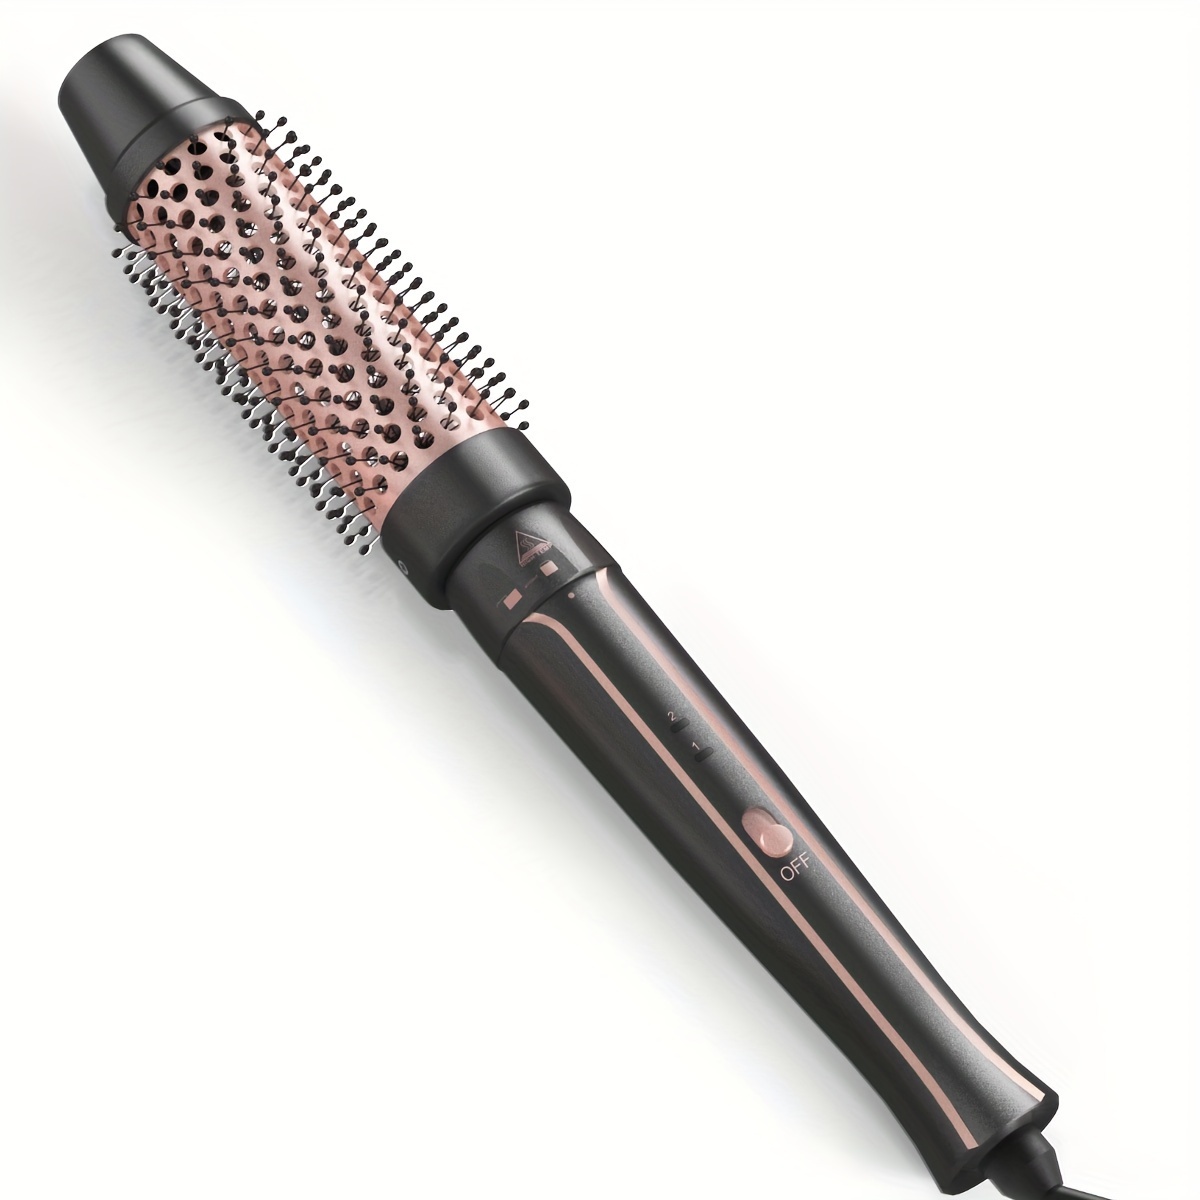 

Thermal Brush, 1 1/2 Inch Heated Round Brush Create Blowout Look & Natural Curls, Dual Voltage Ceramic Curling Iron With Detachable Brush Head Design For Easy Carrying, 30s Fast Heating